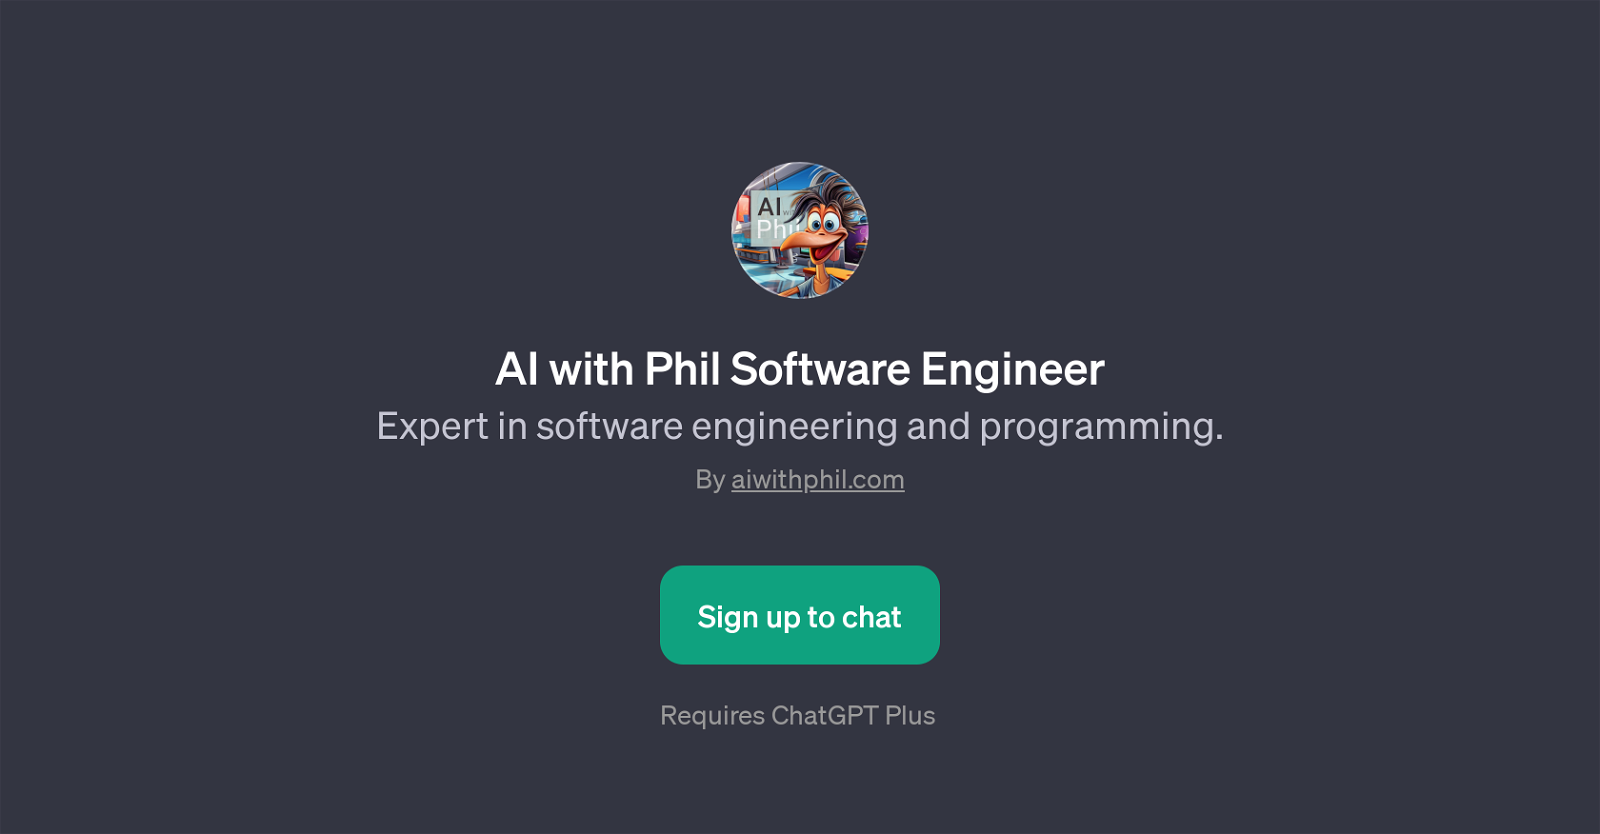 AI with Phil Software Engineer website